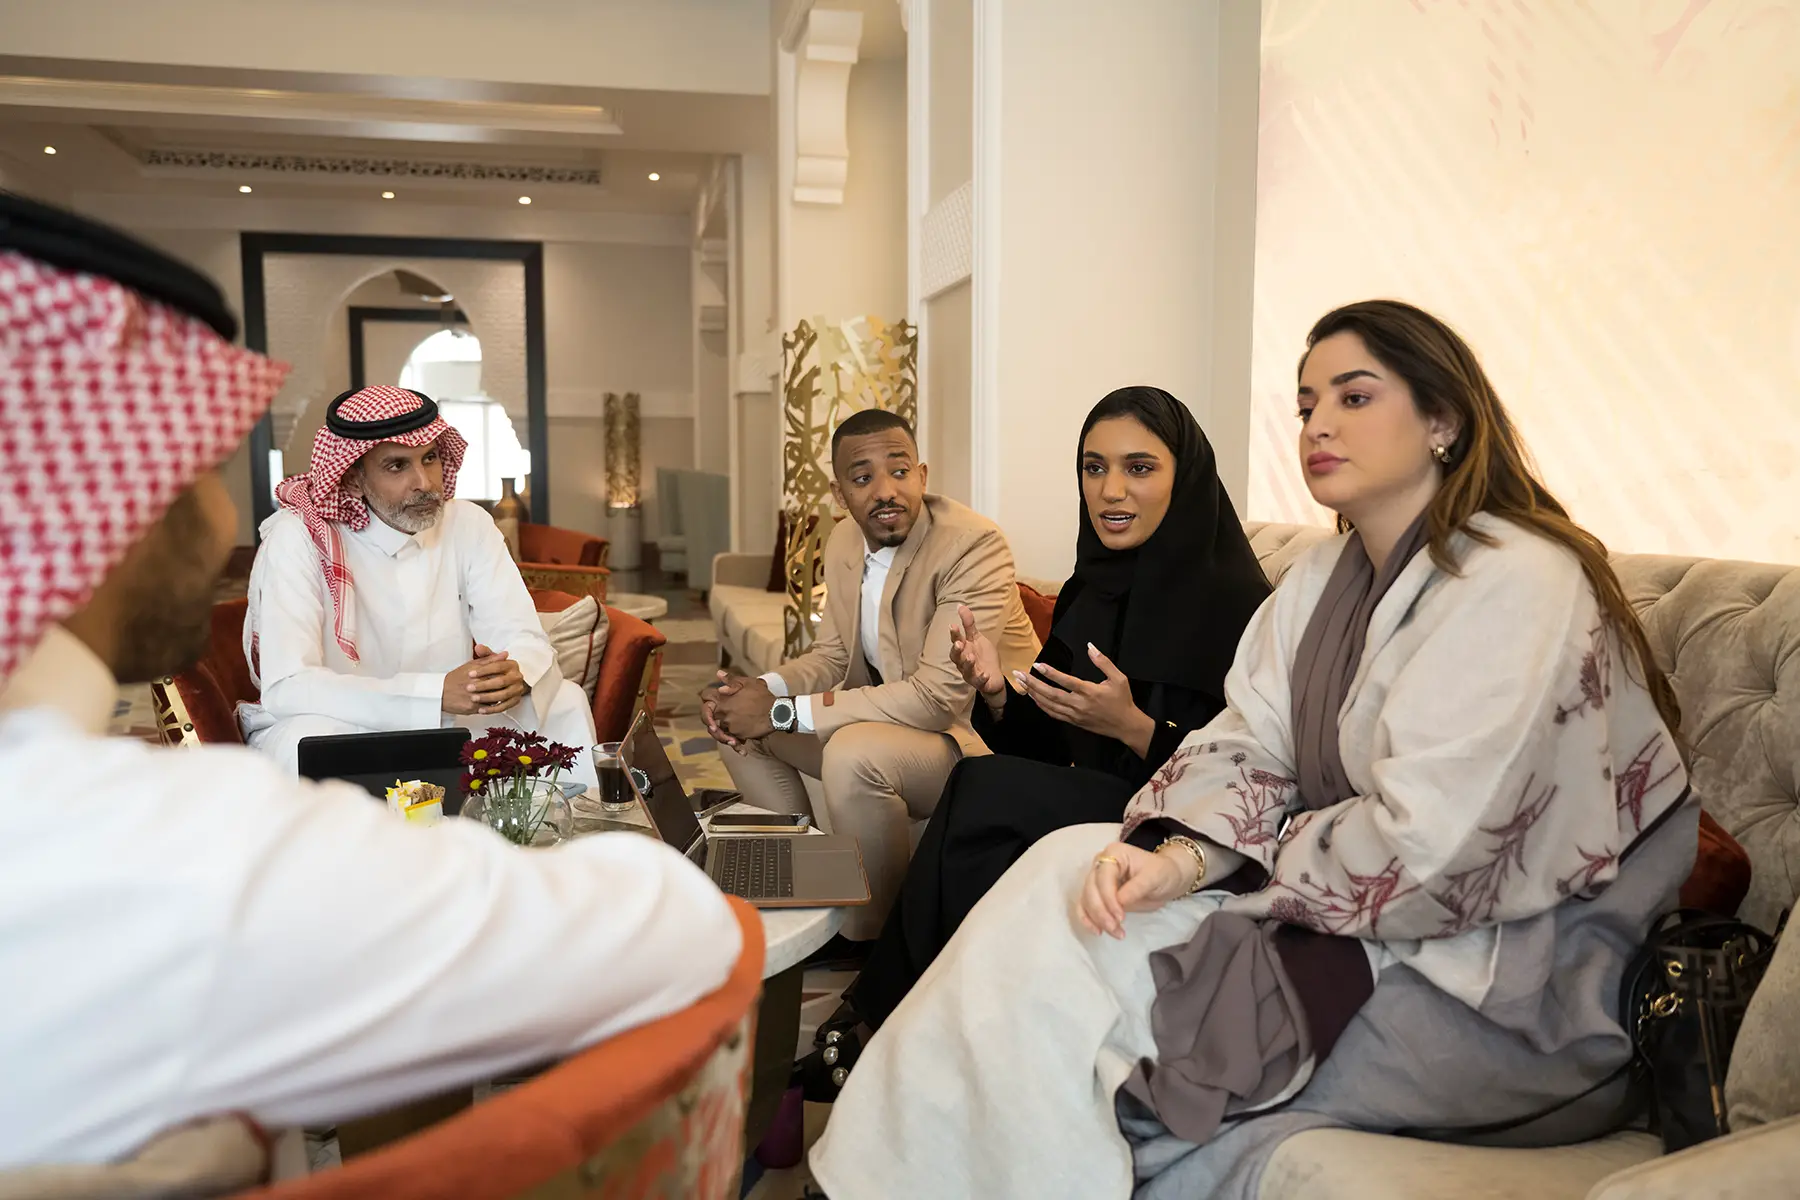 Entrepreneurs in traditional Saudi dress and suits conduct a business meeting in the lobby of a hotel